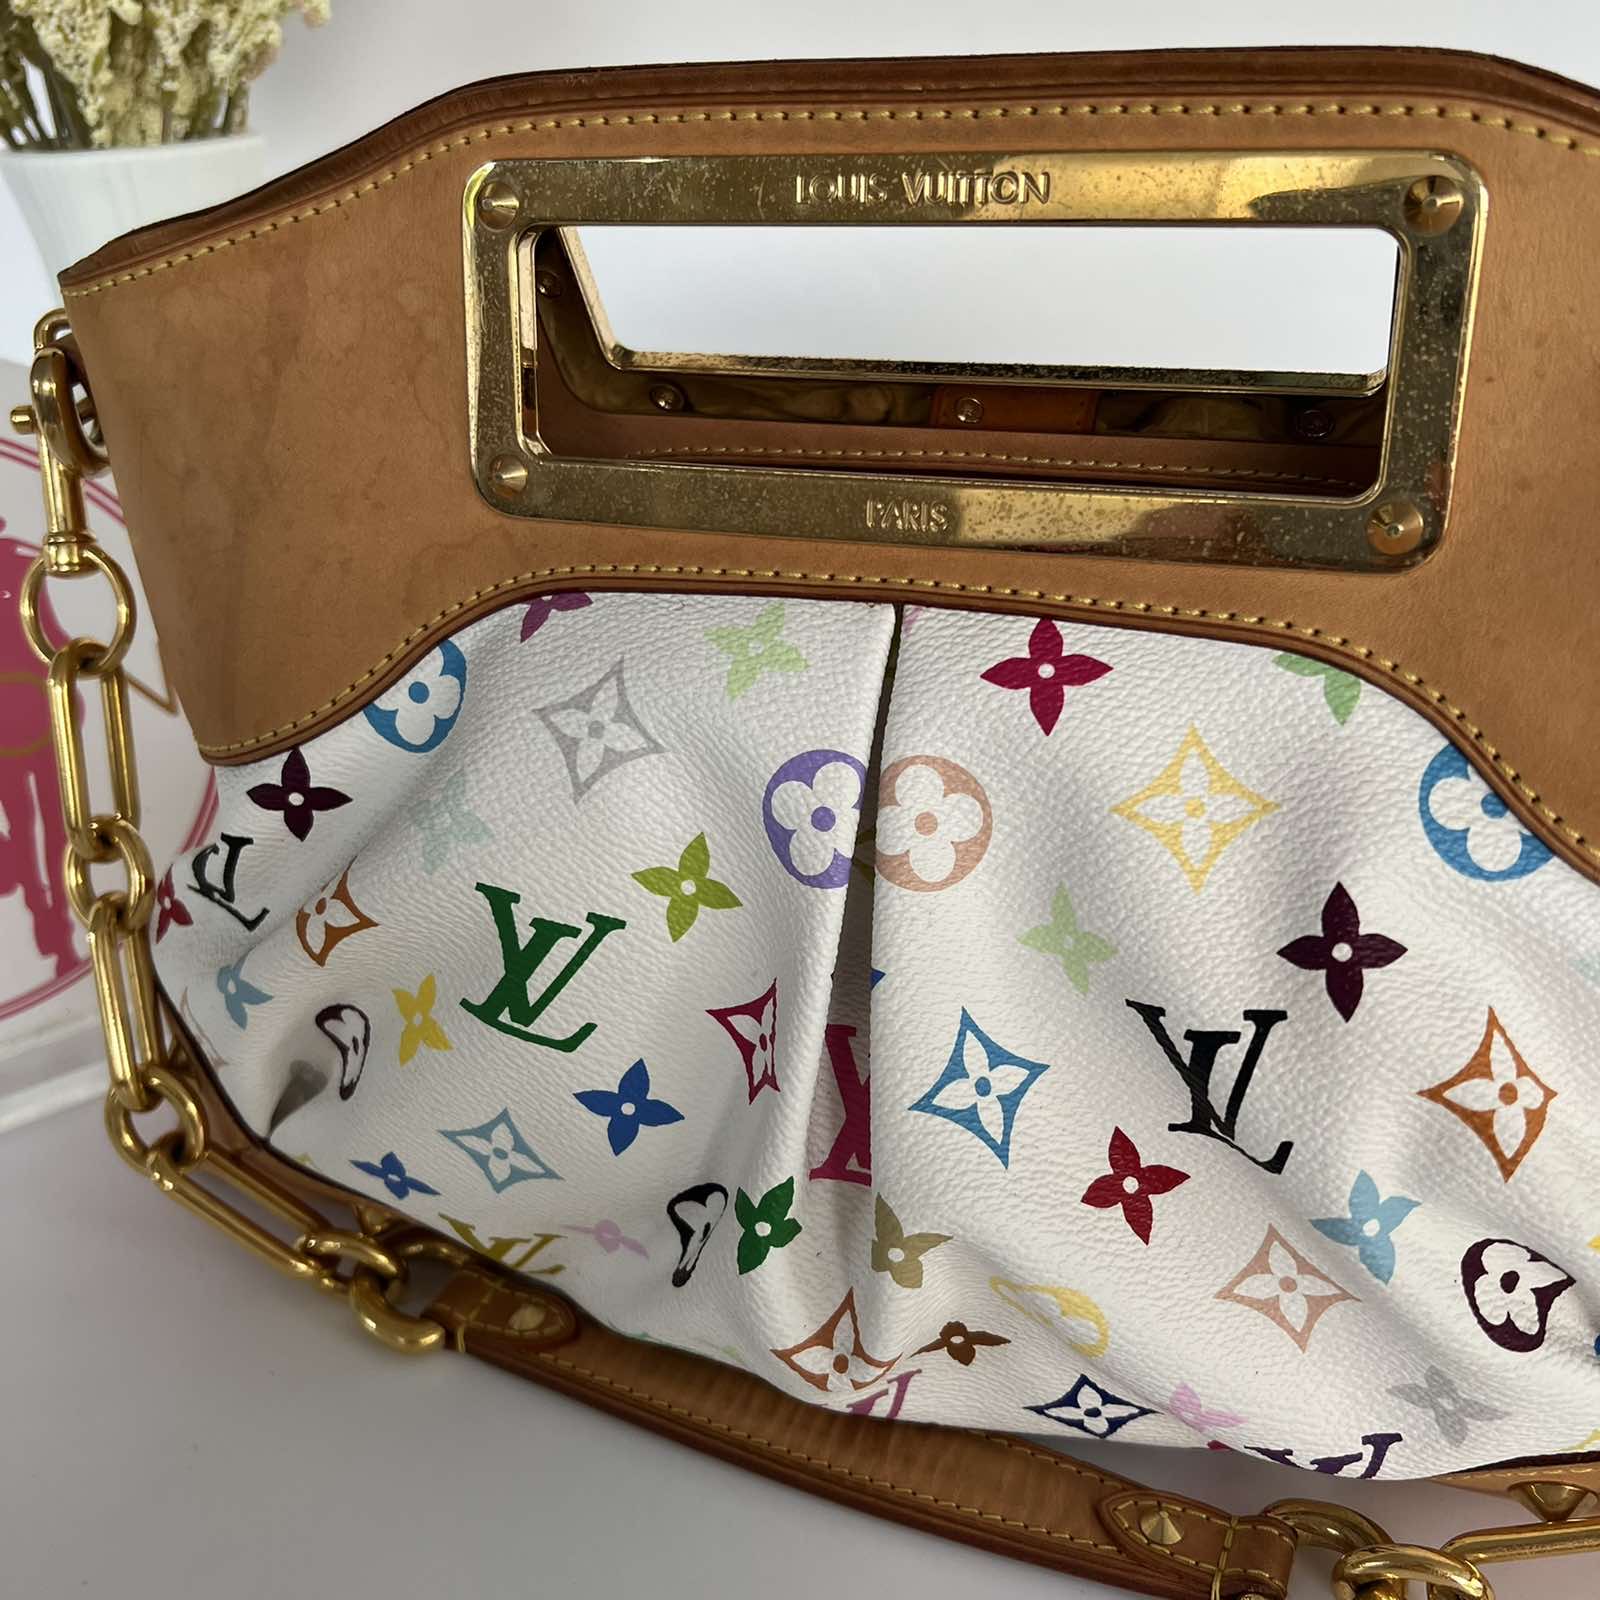 Judy leather bag Louis Vuitton Multicolour in Leather - 22841909